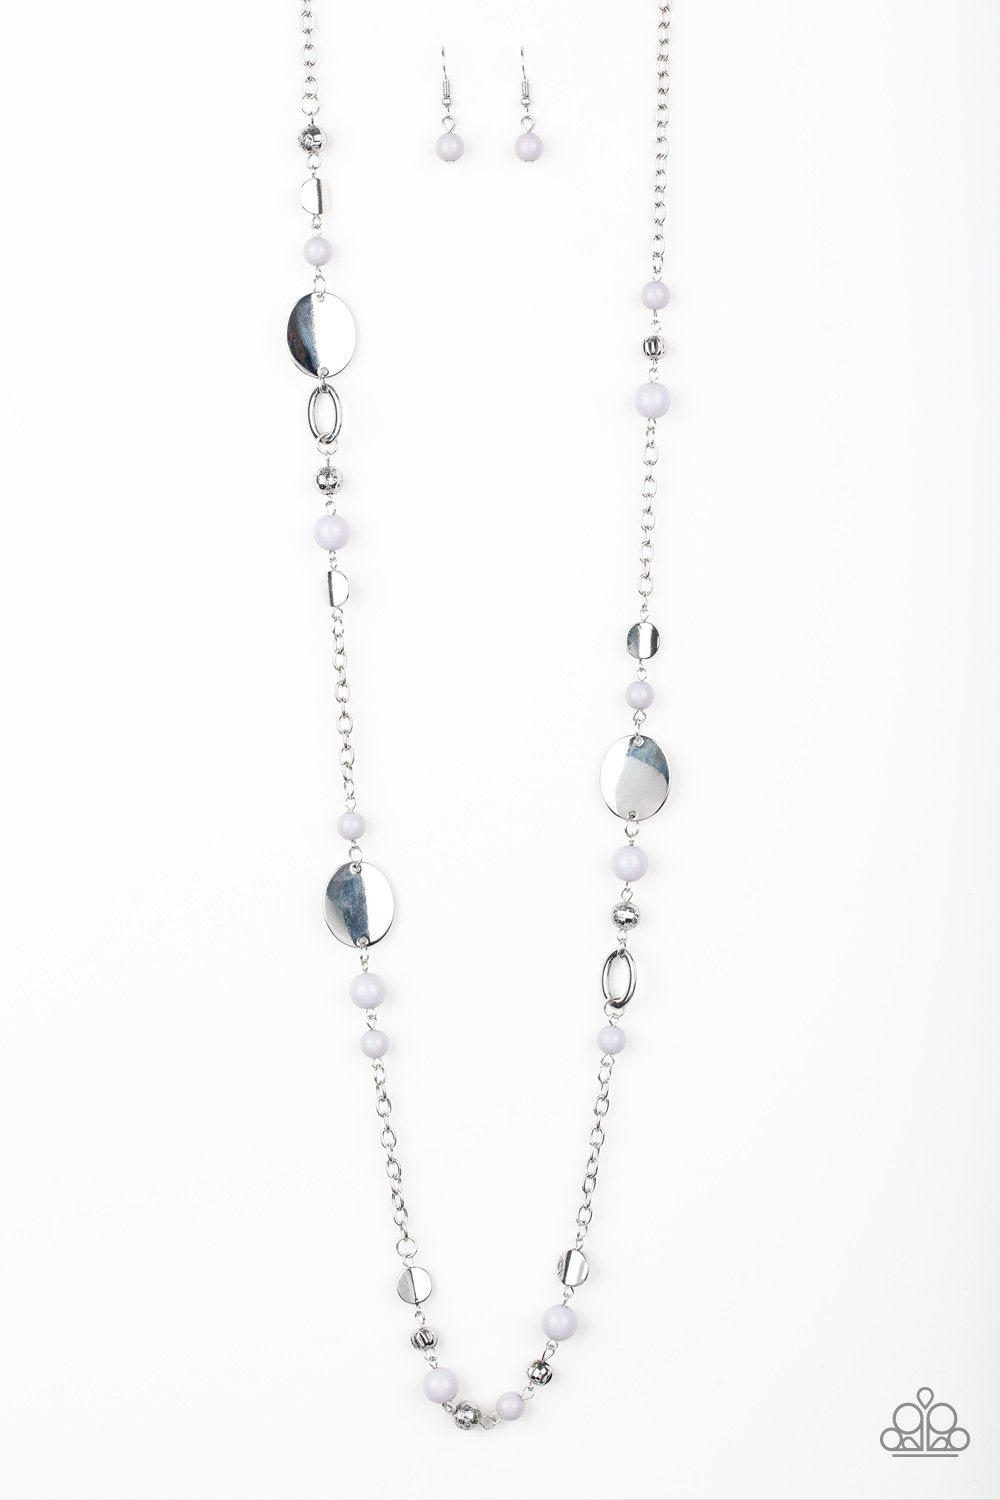 Serenely Springtime Silver Necklace - Paparazzi Accessories - lightbox -CarasShop.com - $5 Jewelry by Cara Jewels